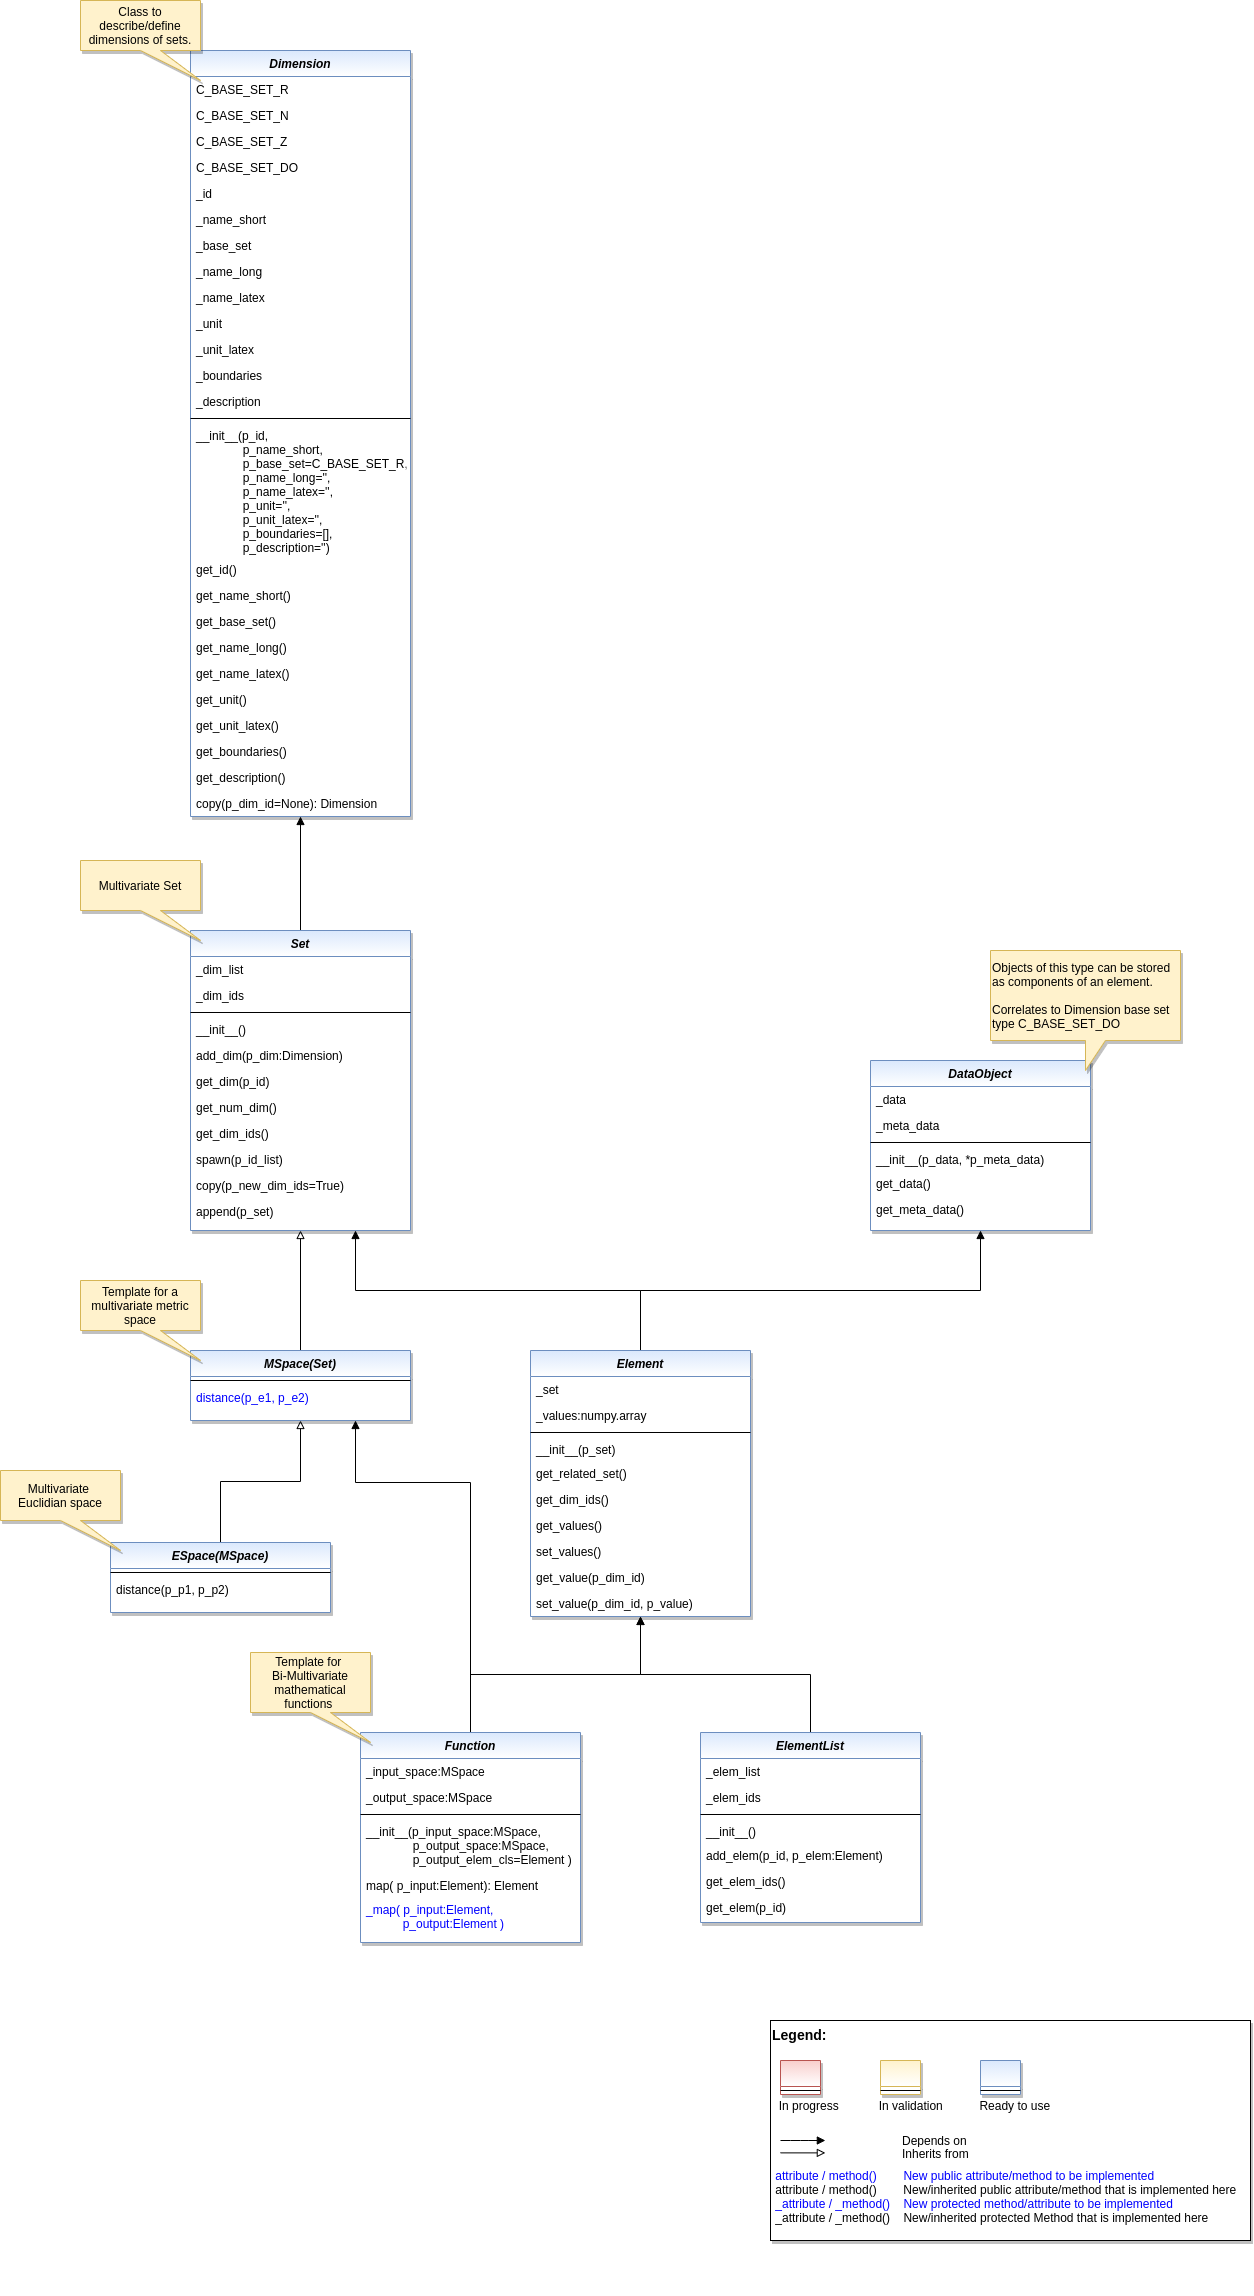 ../../../_images/MLPro-BF-Math_class_diagram.png